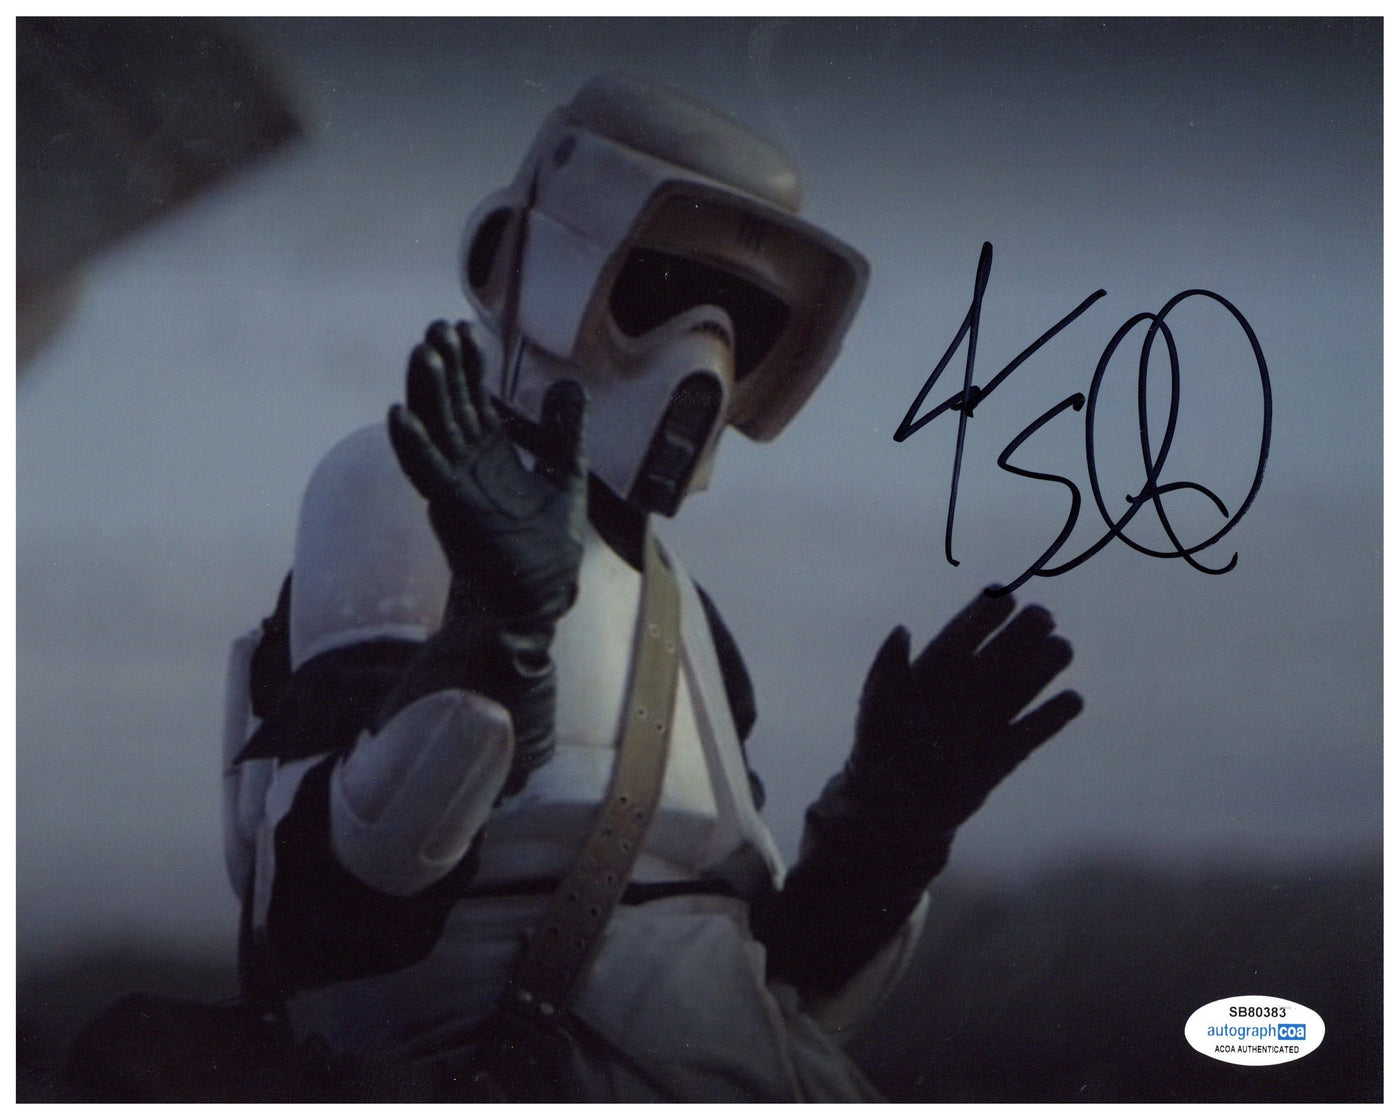 Jason Sudeikis Signed 8x10 Photo Star Wars Scout Trooper The Child Autographed ACOA